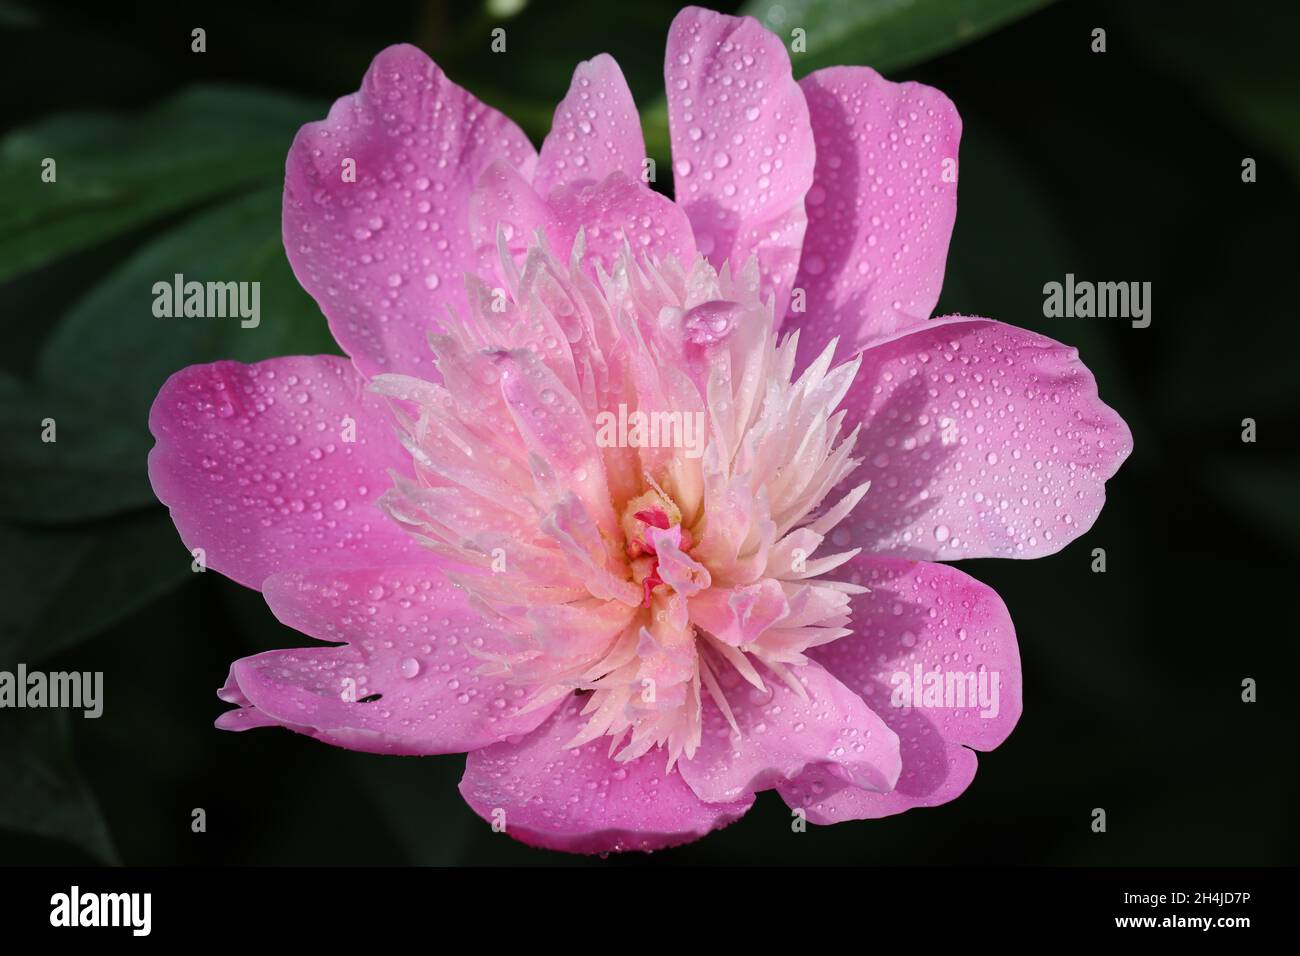 close-up of a single delicate pink peony flower with many small rain droplets on its petals Stock Photo